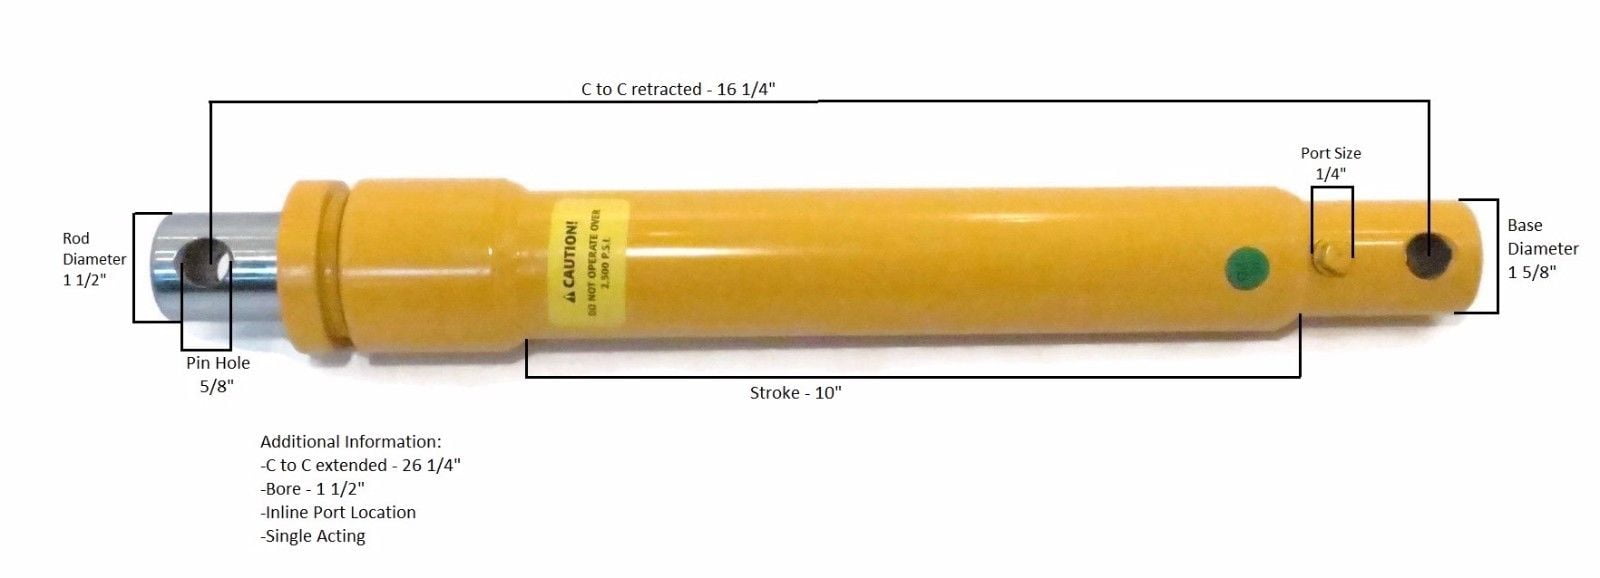 Snow Plow Angle Angling CYLINDER RAMS 05810 Meyer Snowplow Blade 1.5" x 10" 4 